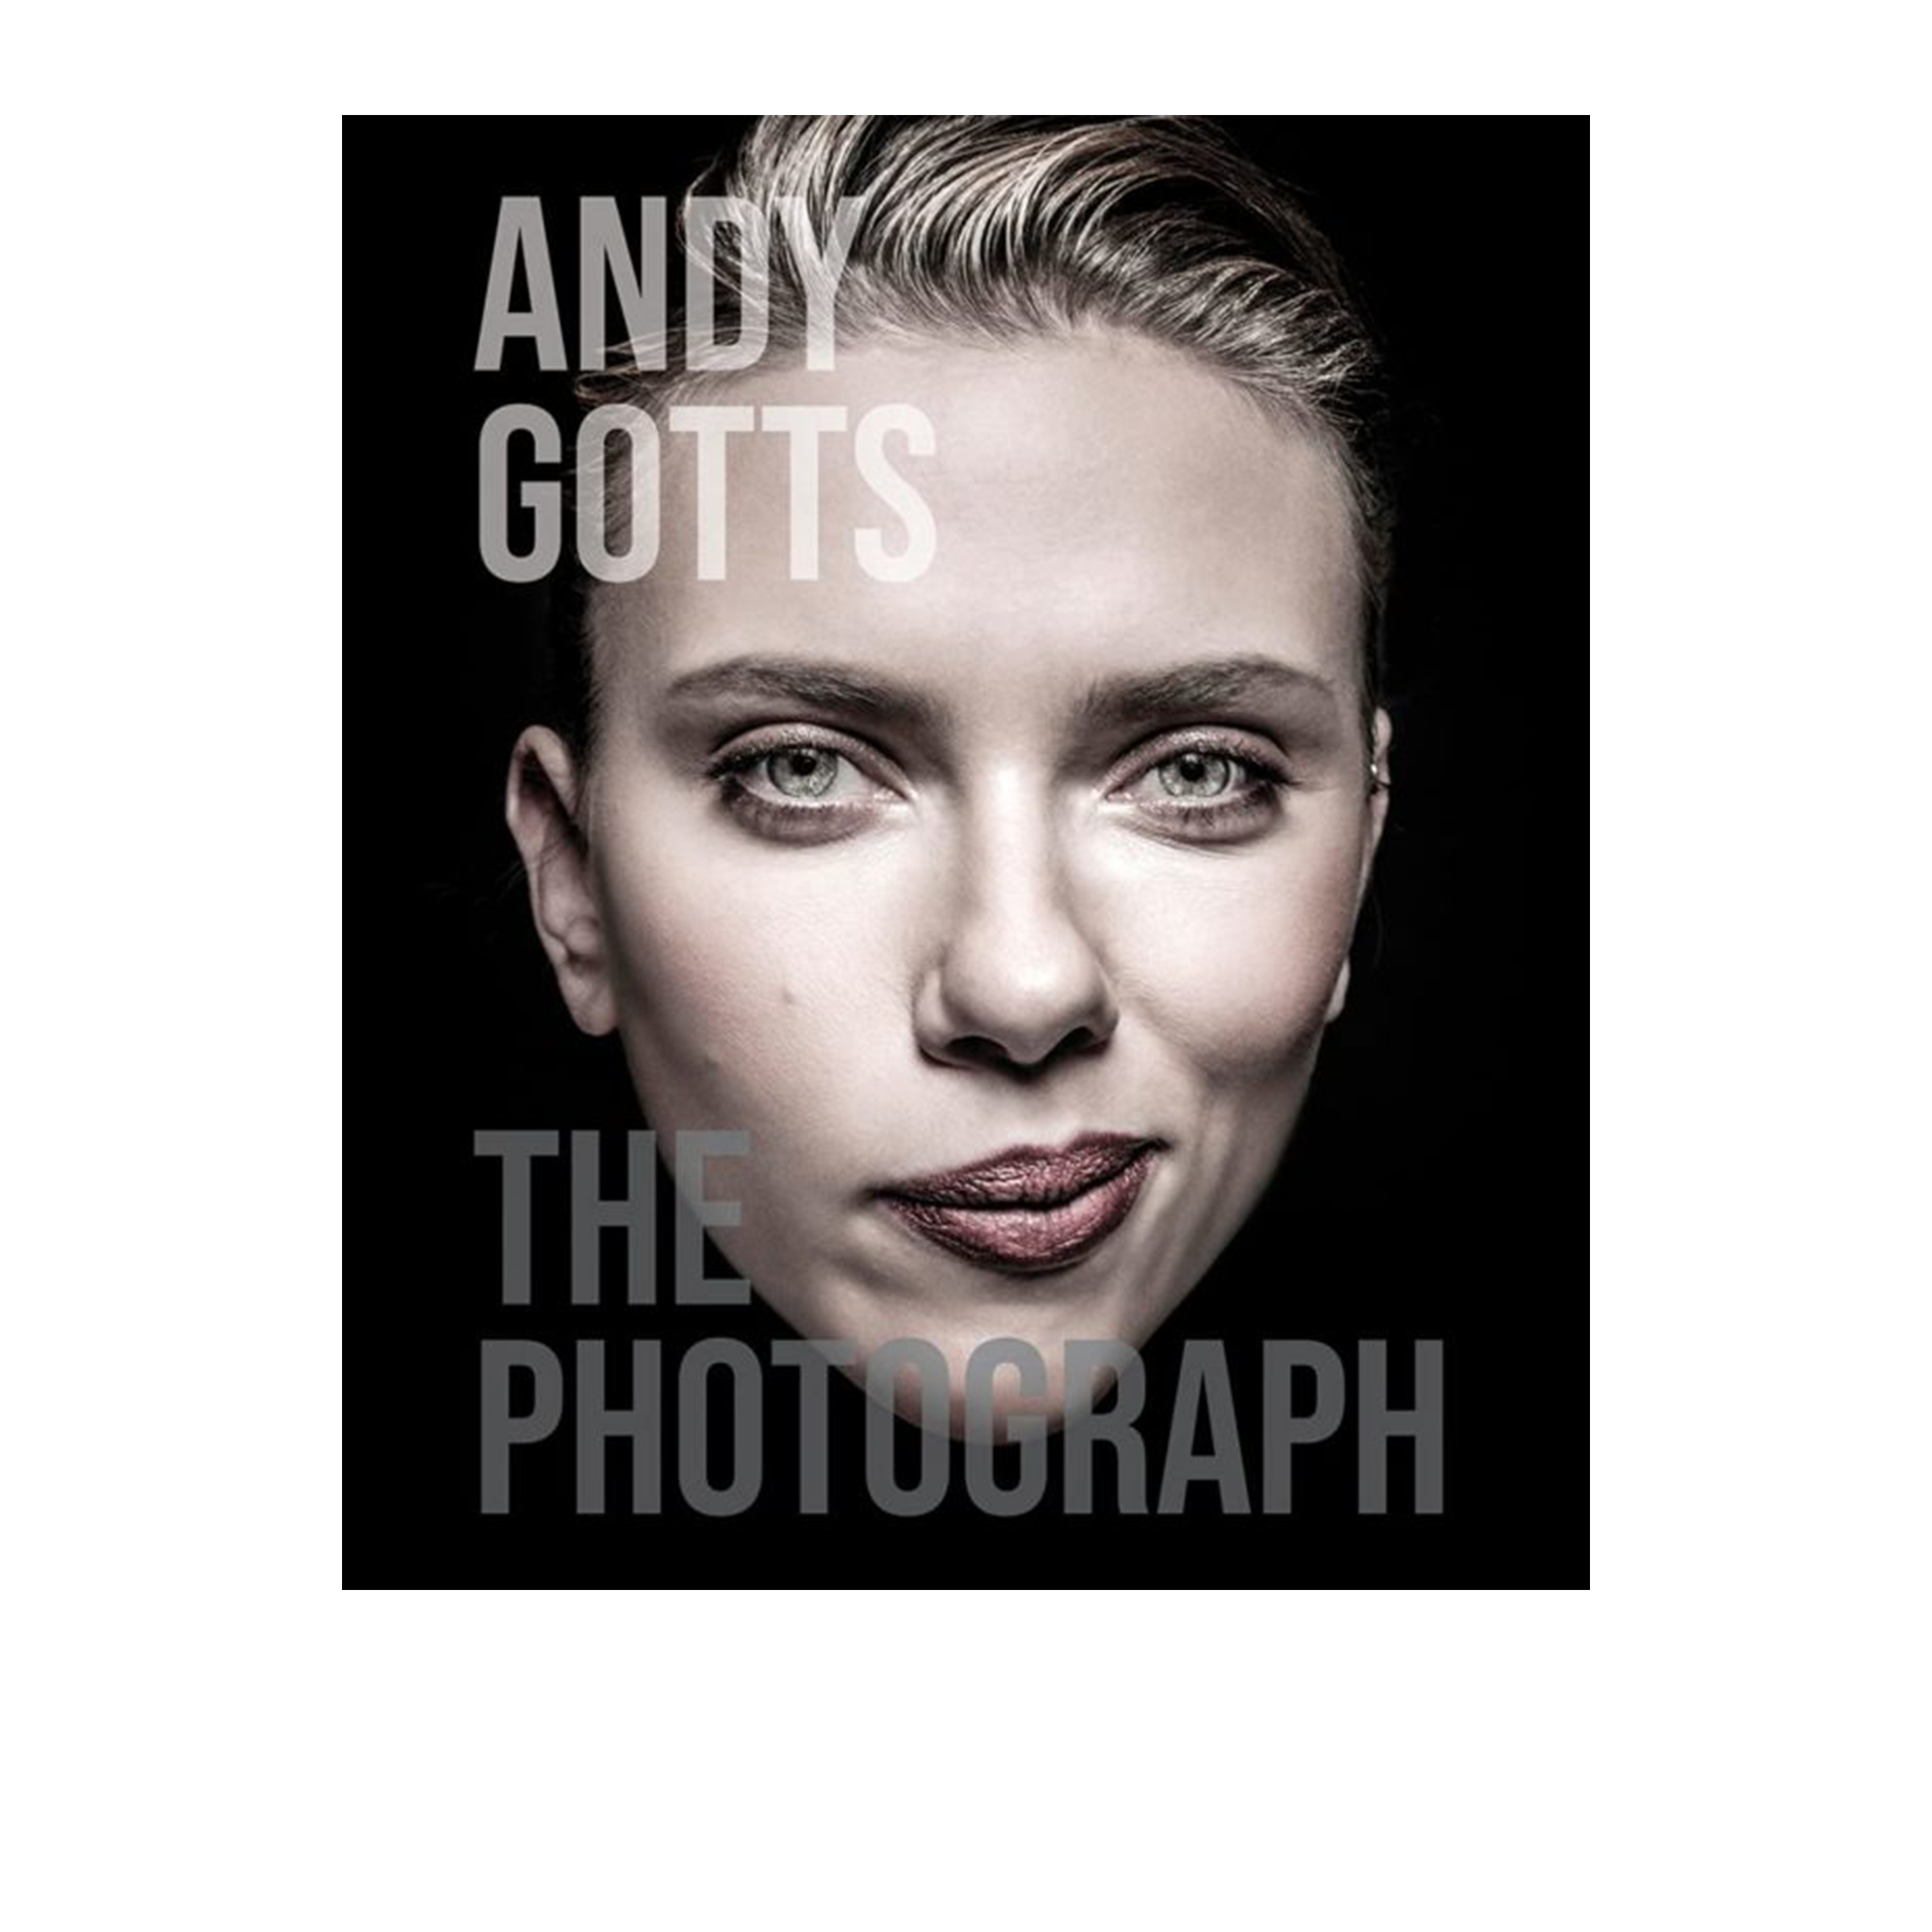 Andy Gotts -The Photograph Coffee Table Book